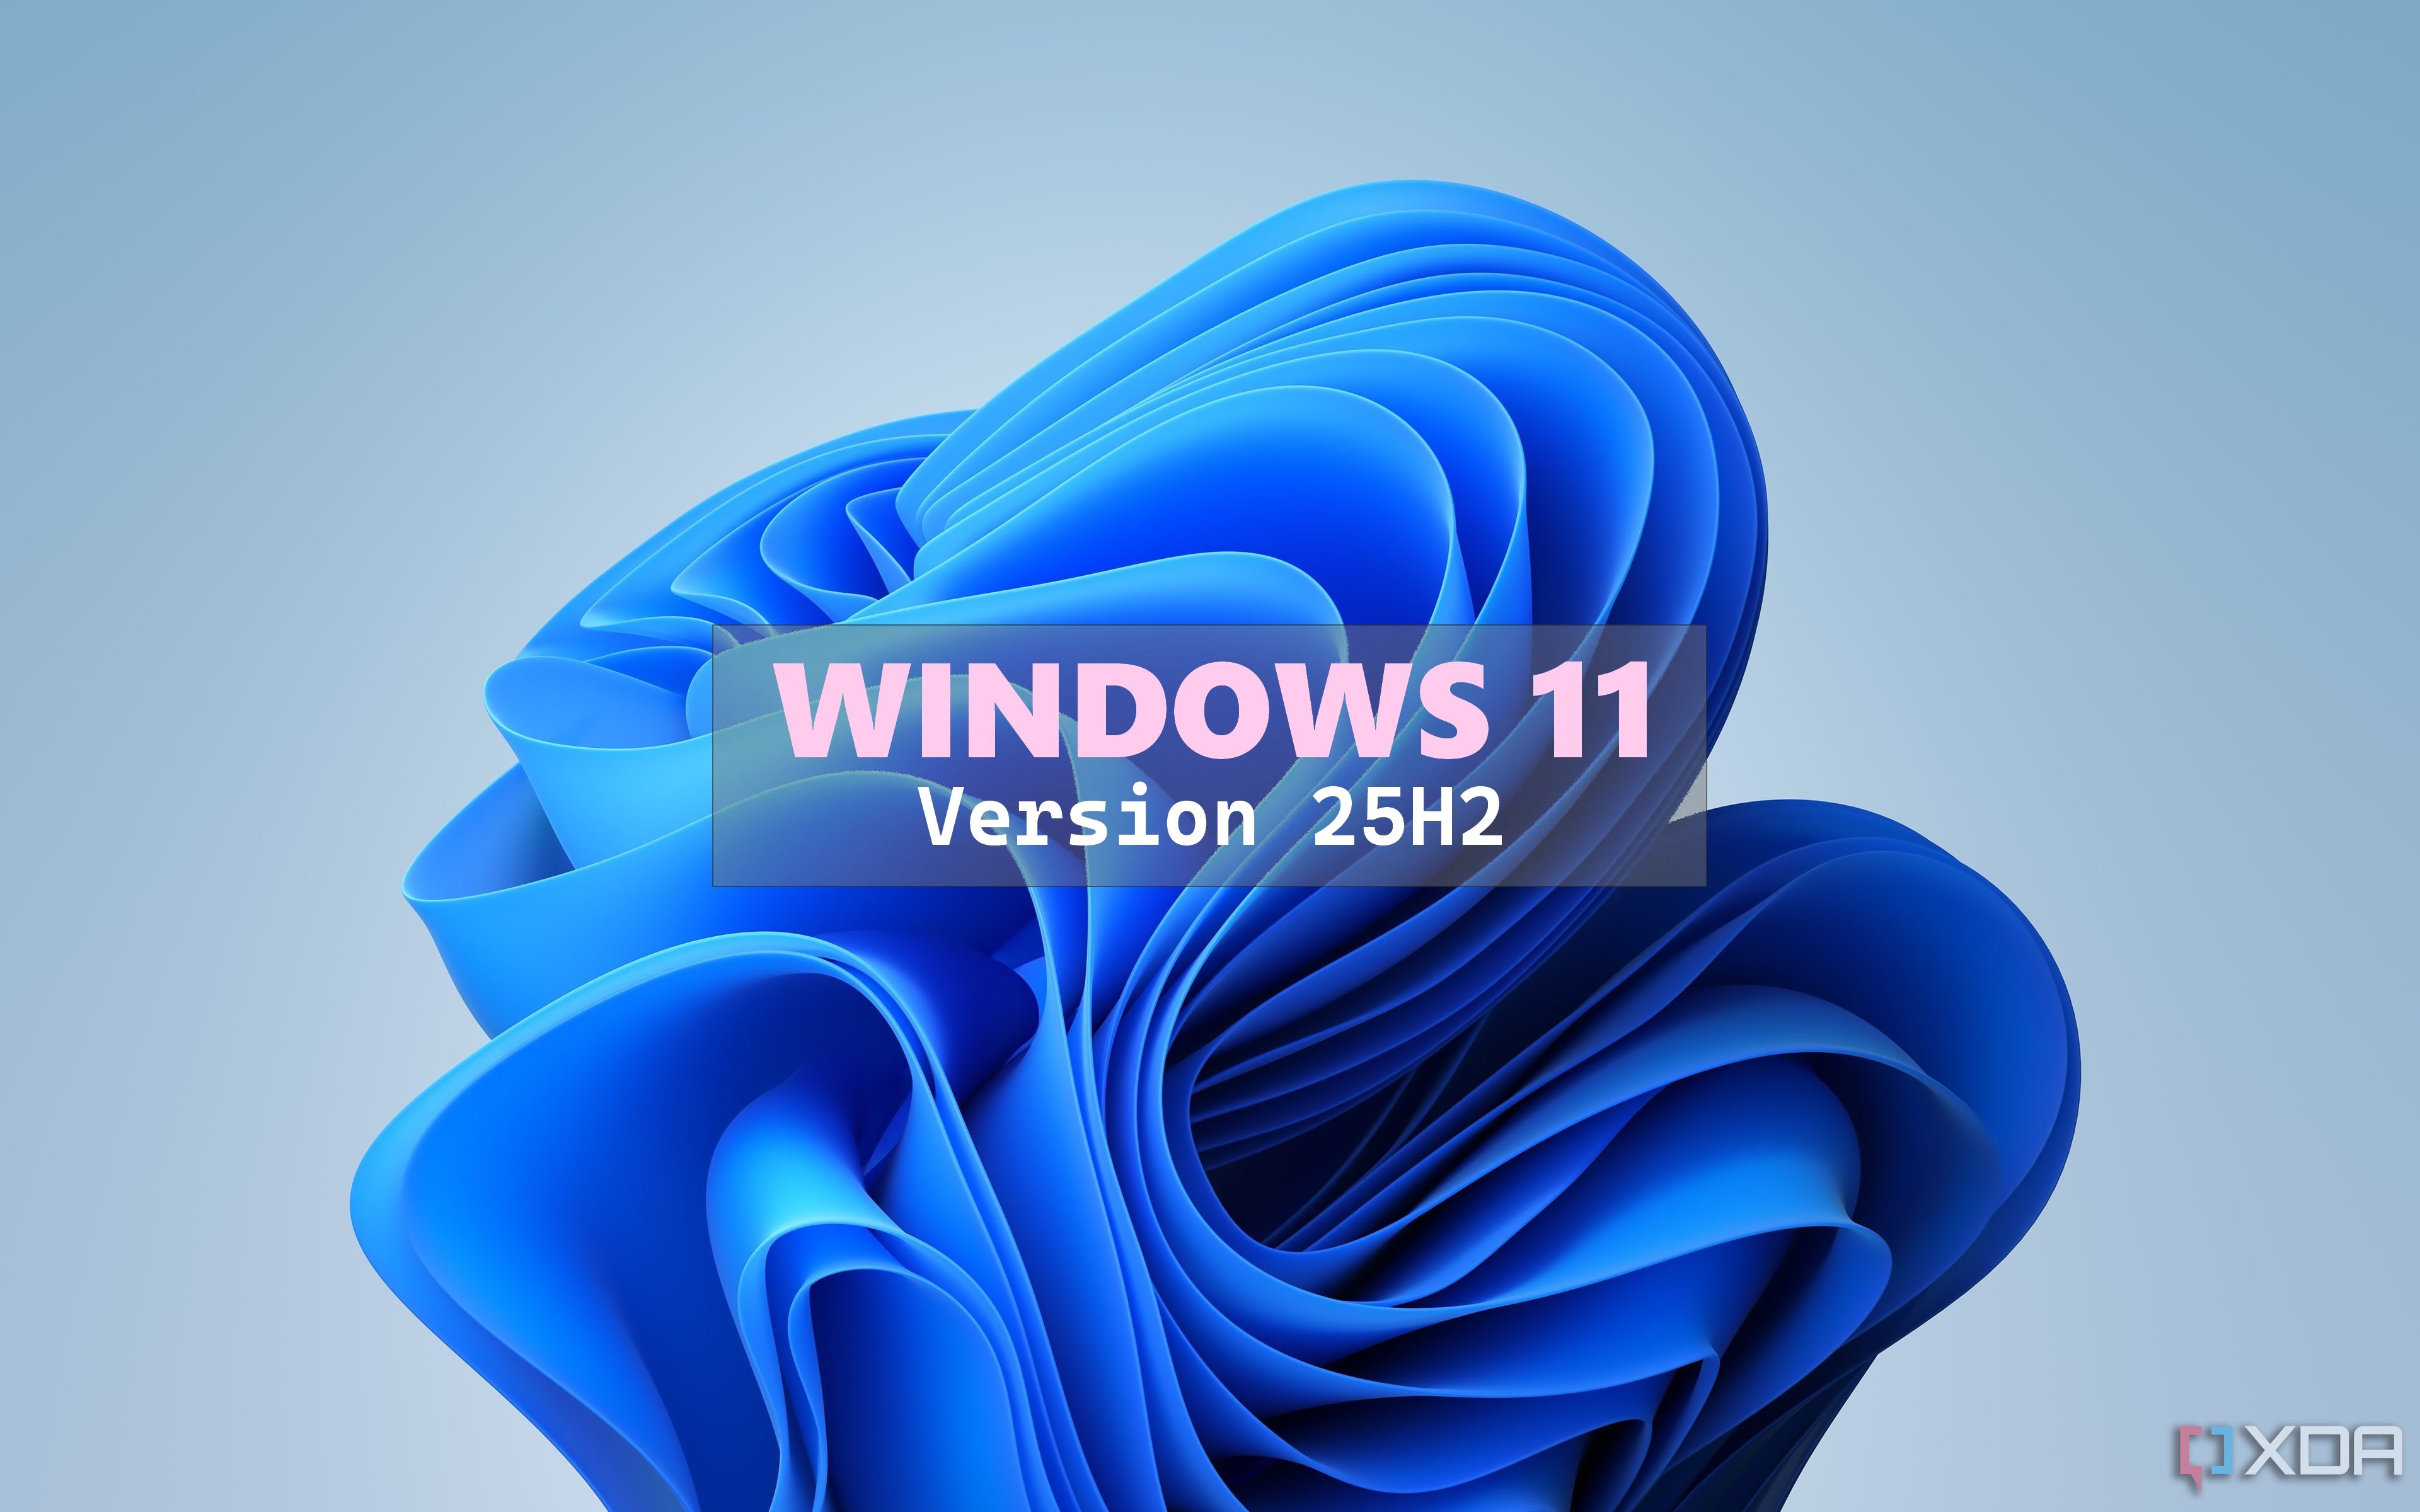 Windows 11 Bloom wallpaper with text reading Windows 11 Version 25H2 over it